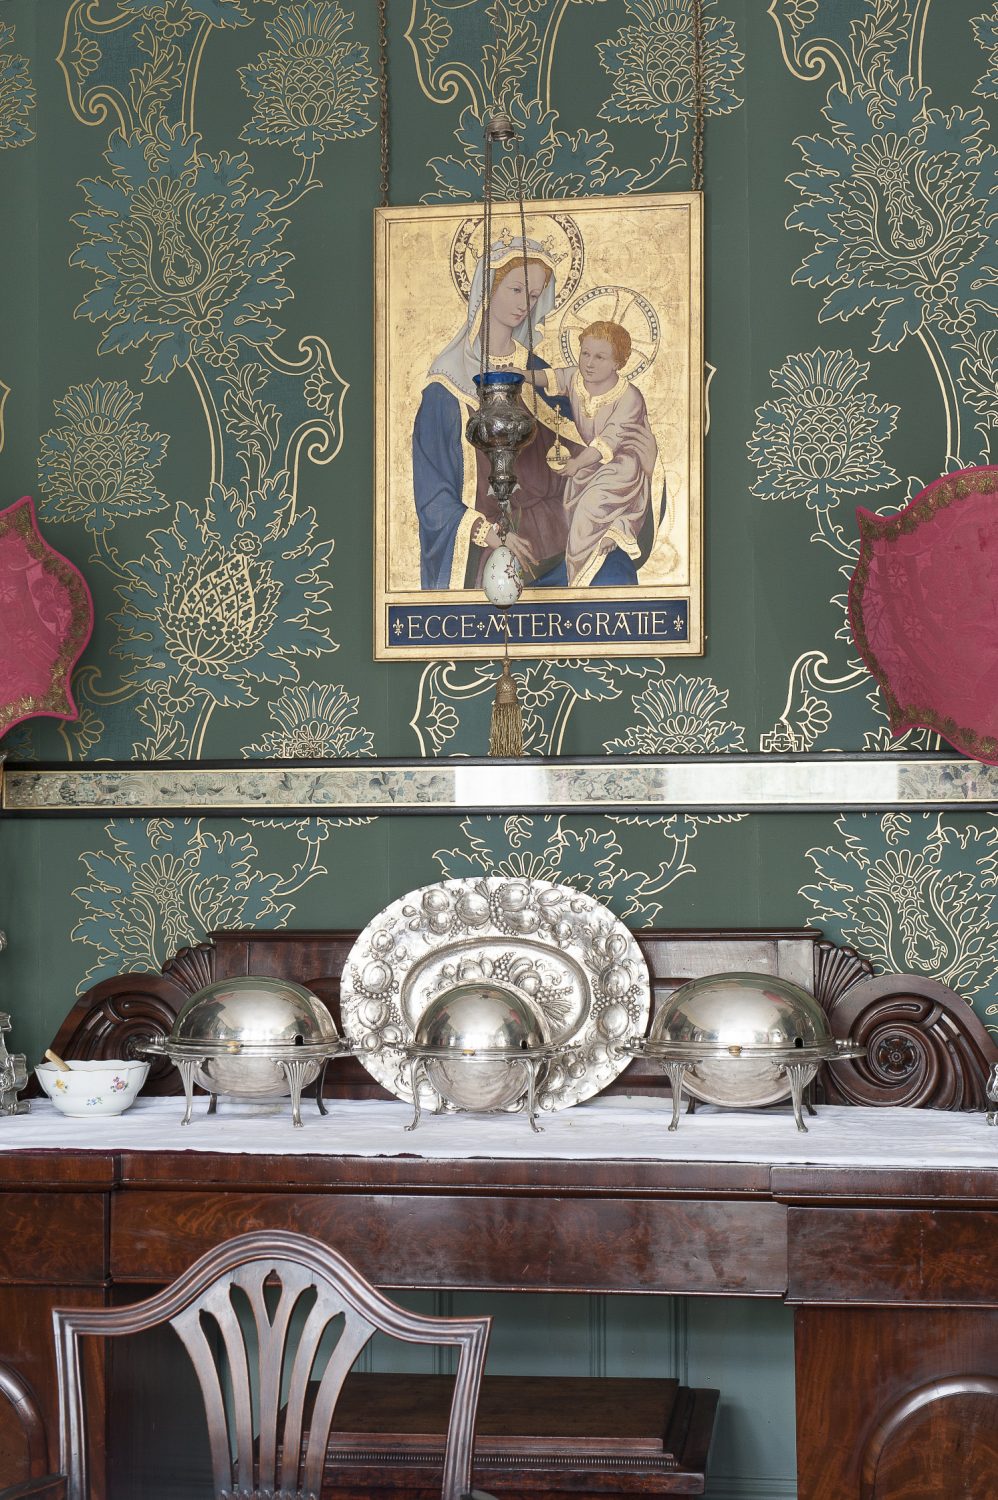 Part of the St. Benedict experience is breakfast in the dining room just across the hall from the drawing room, resplendent with green and gold Watts of Westminster wallpaper and a crystal chandelier, served in silver chafing dishes in the English country house manner